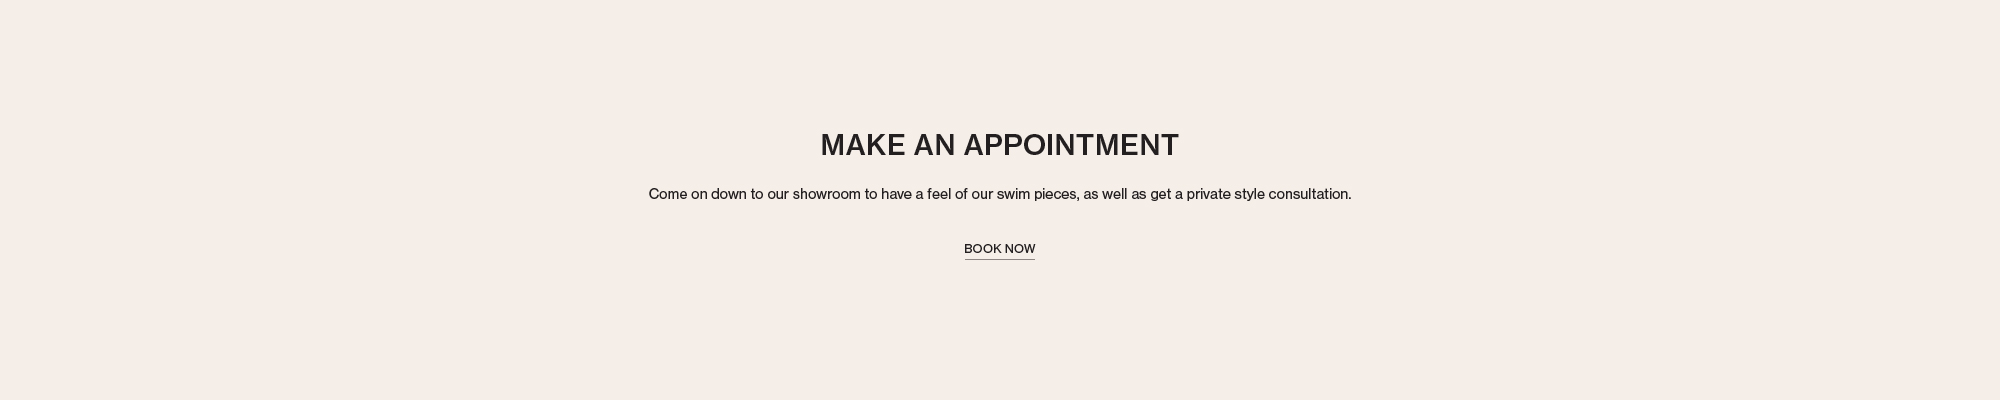 Make an appointment to Align Swim showroom